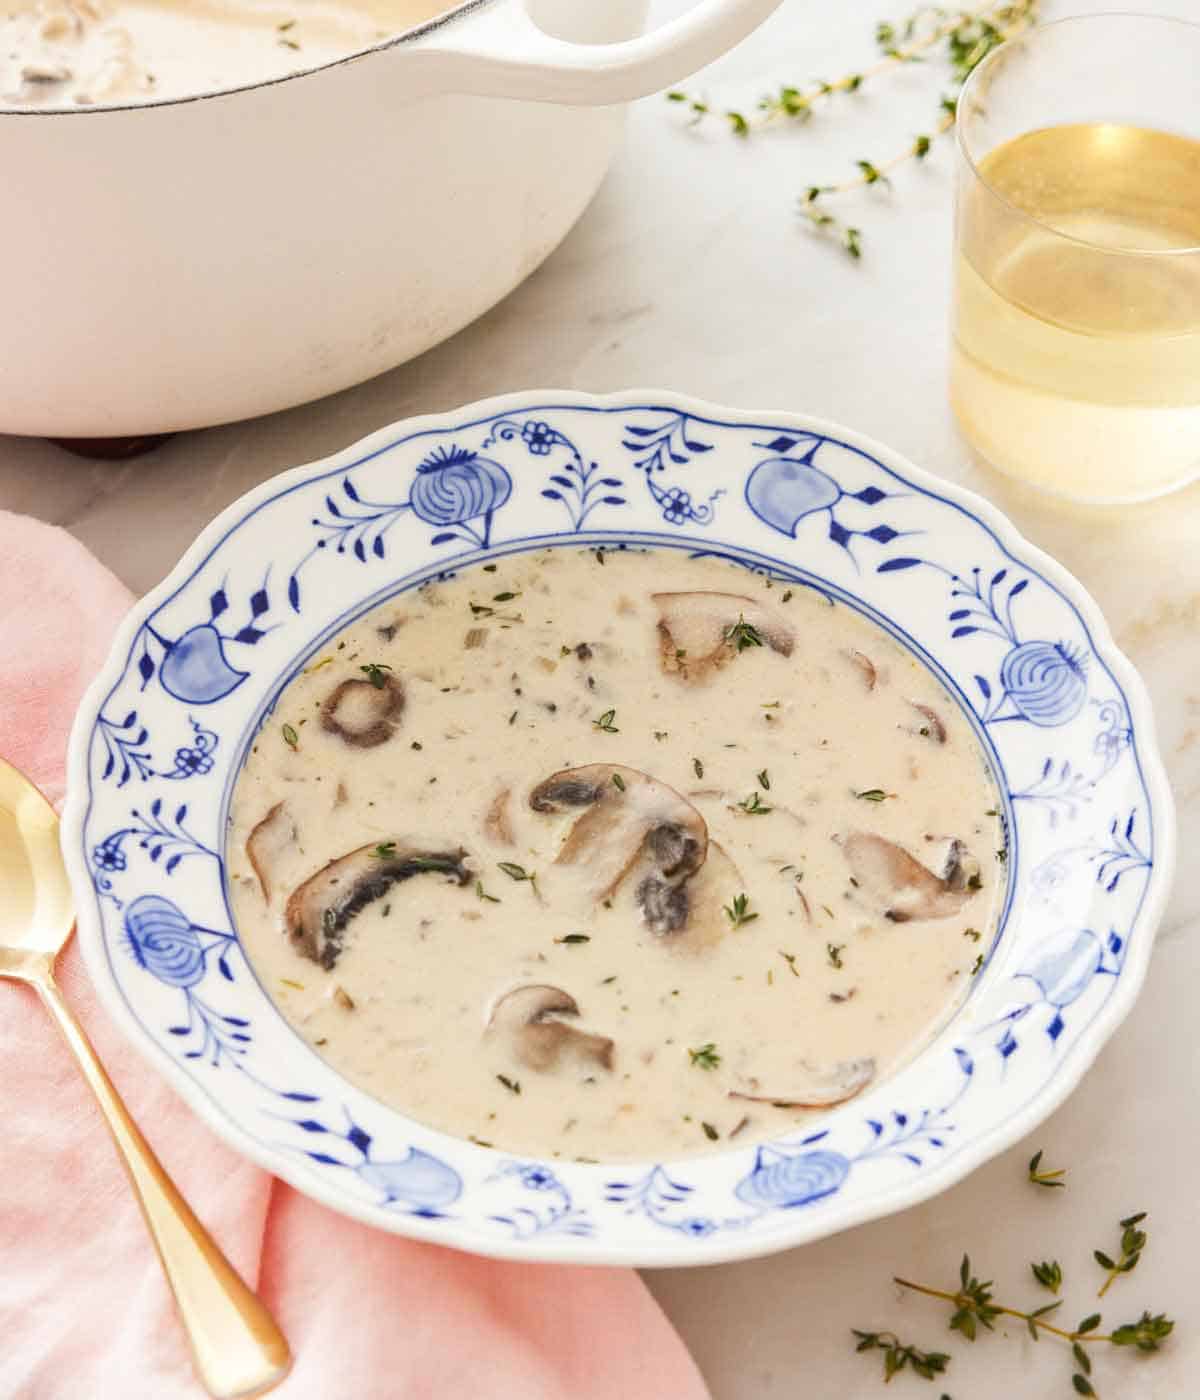 A bowl of cream of mushroom soup with a glass of wine and white pot in the background.